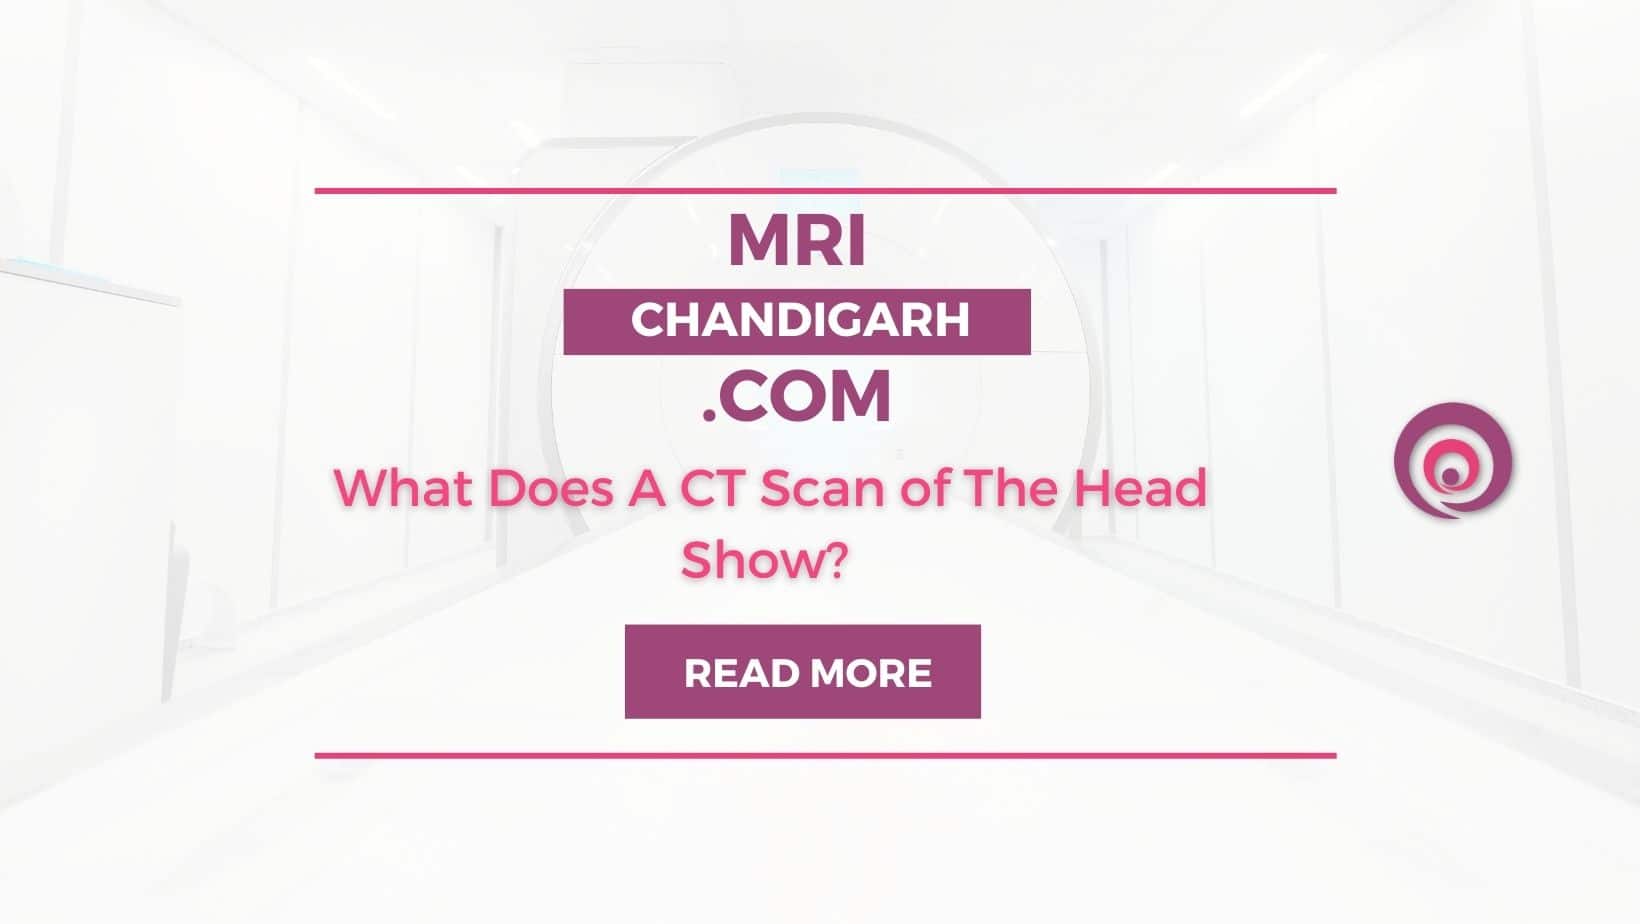 What Does A CT Scan of The Head Show? 